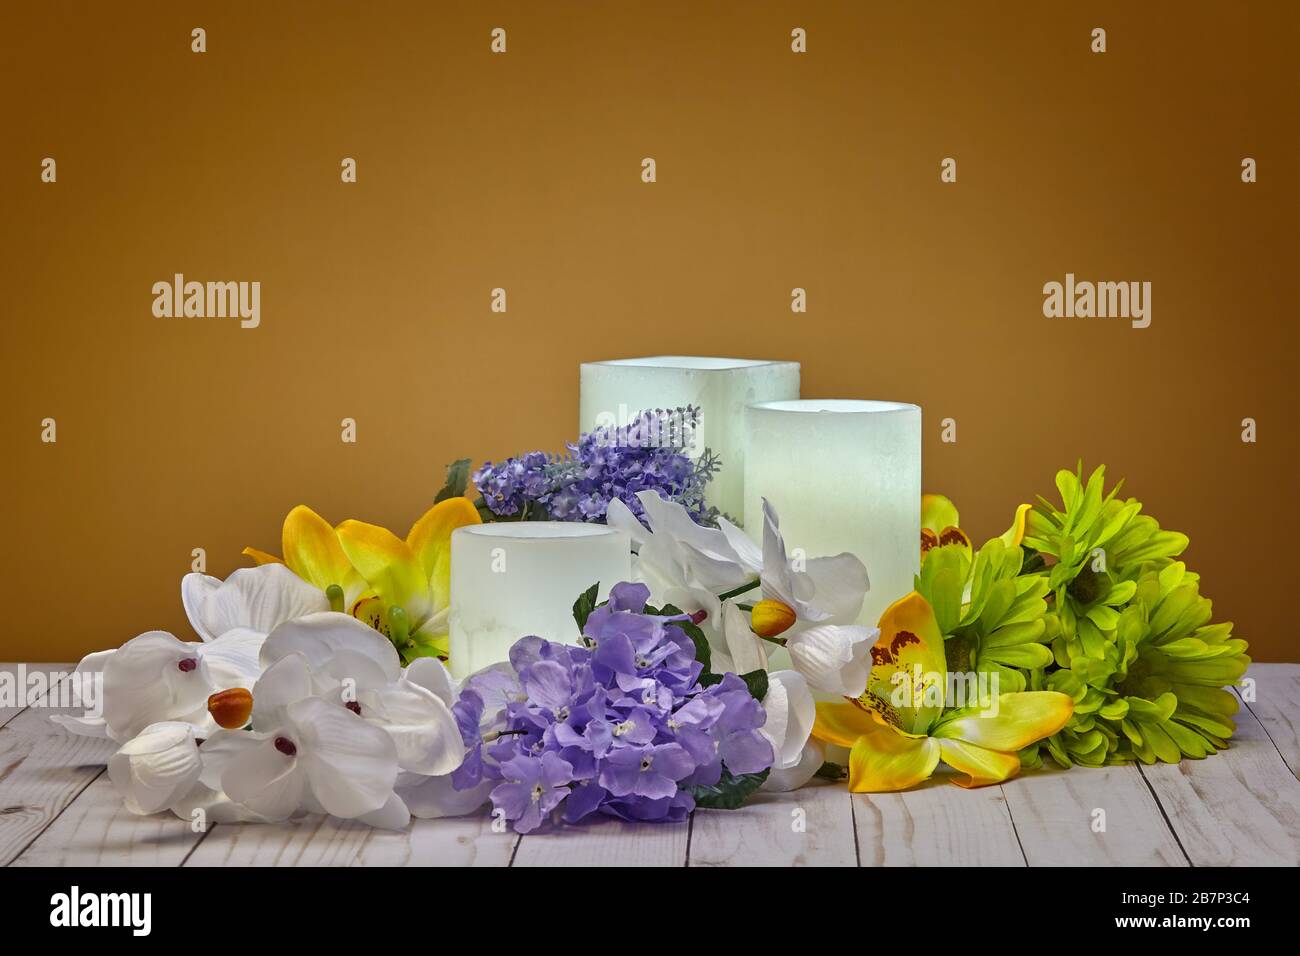 Group of Glowing White Wax Candles and Artificial Spring Flowers Stock Photo